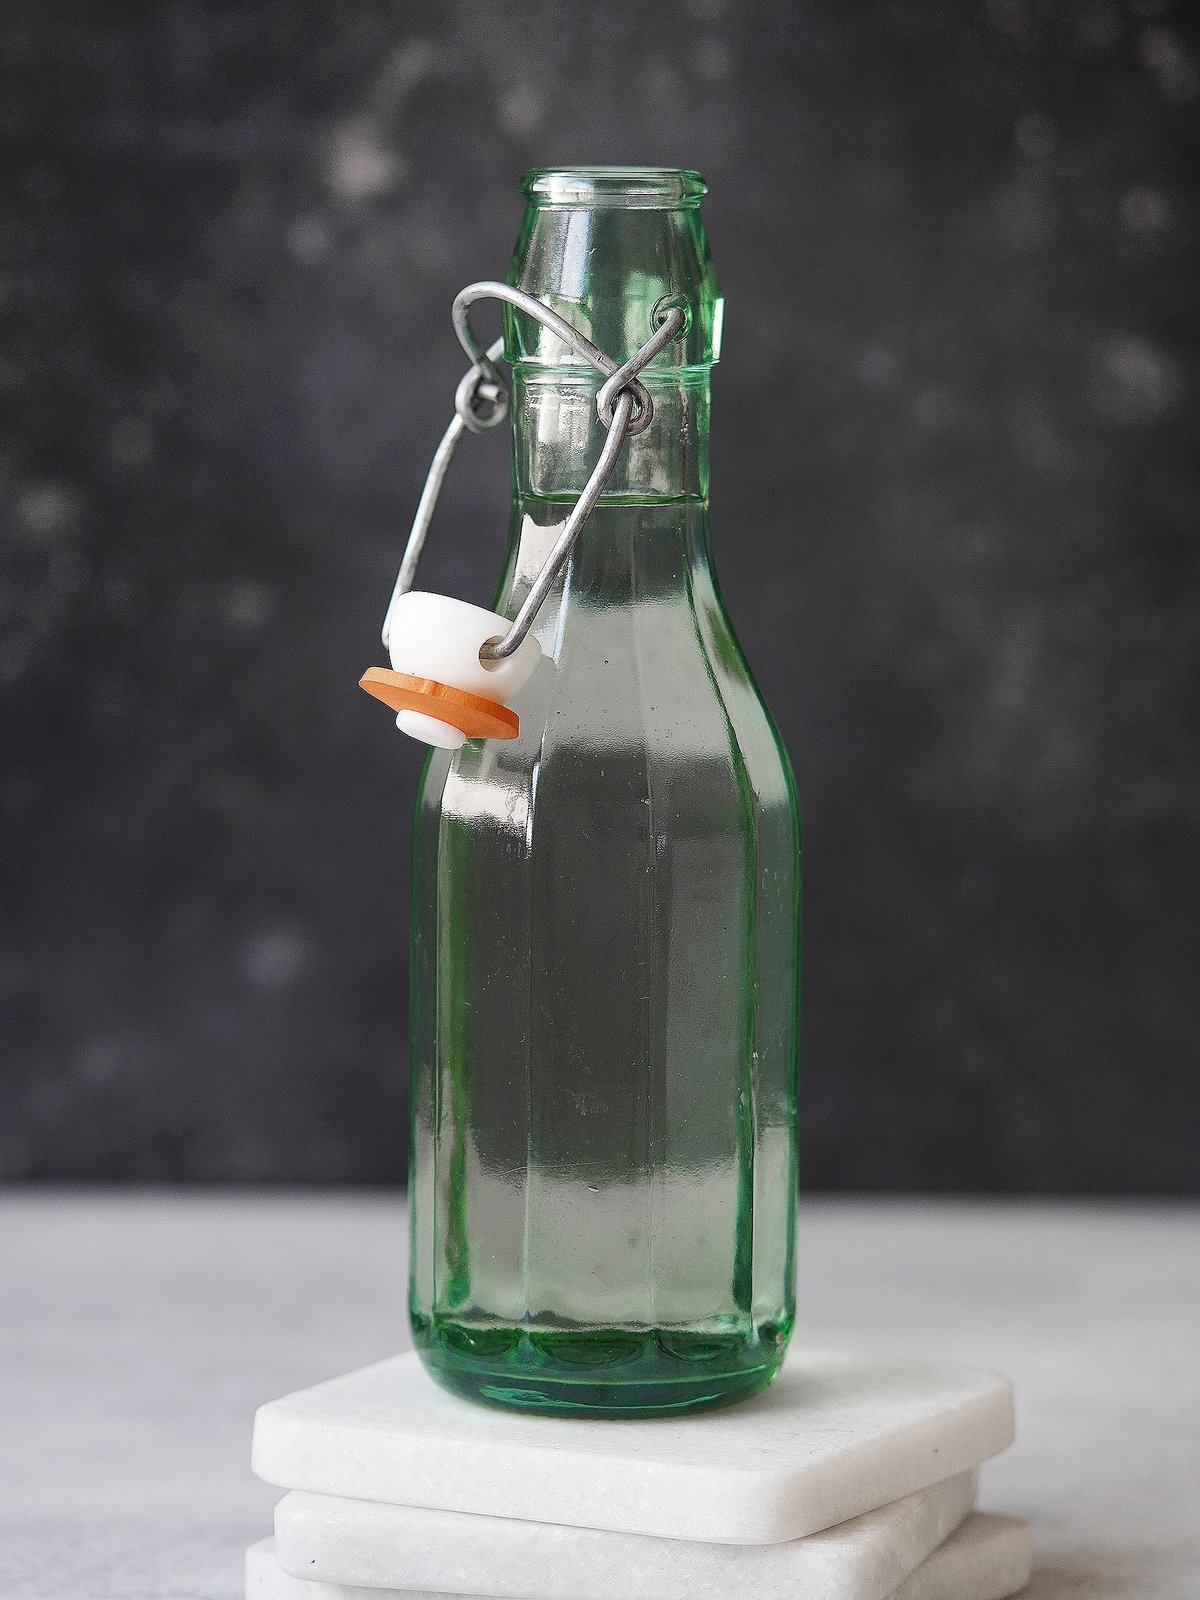 A green glass bottle with clear simply syrup. Dark background